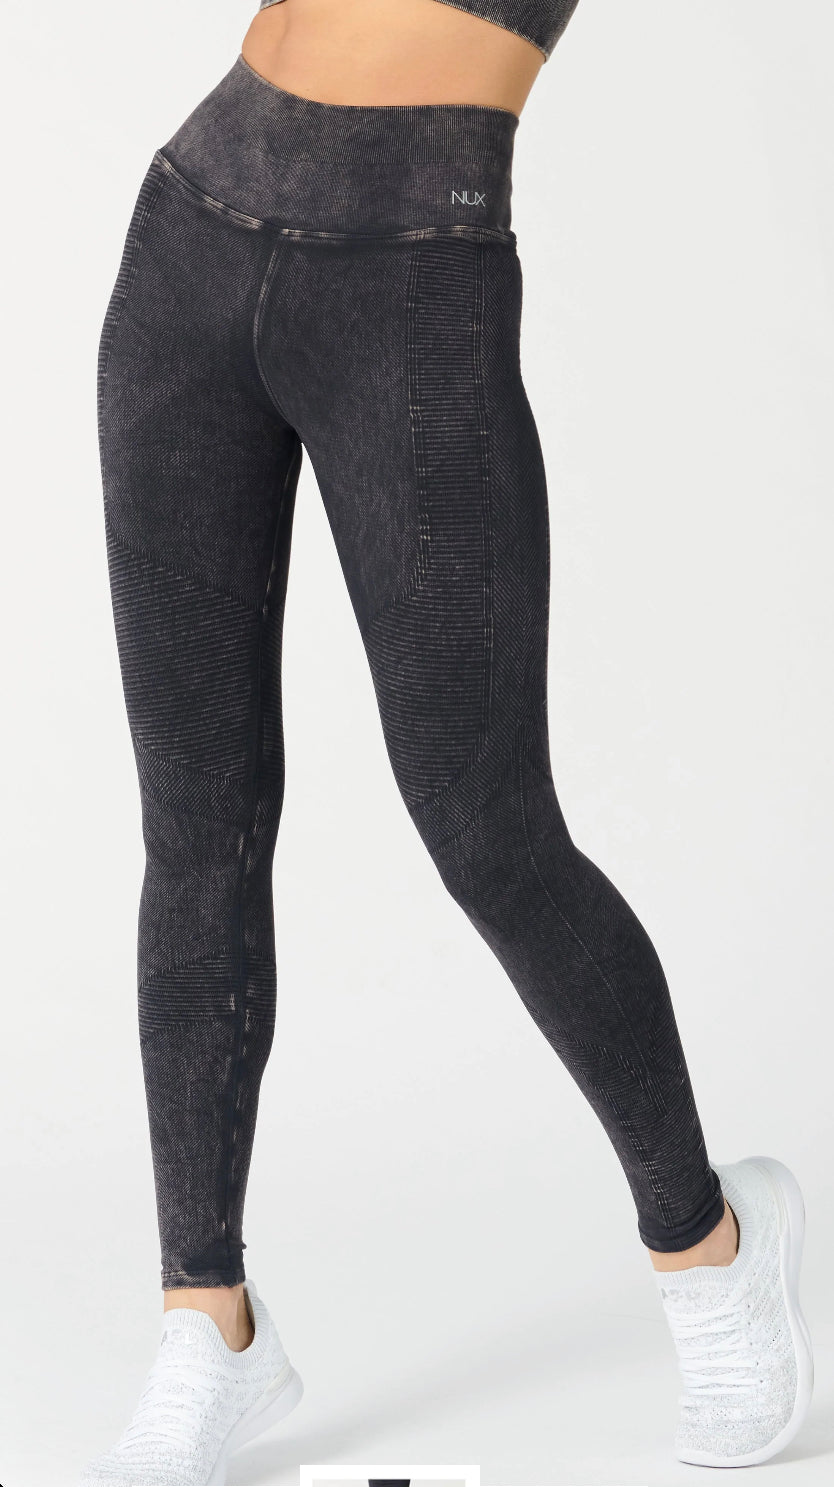 NUX One by One Legging in Black Mineral Wash – Forte Fitness Southern Pines